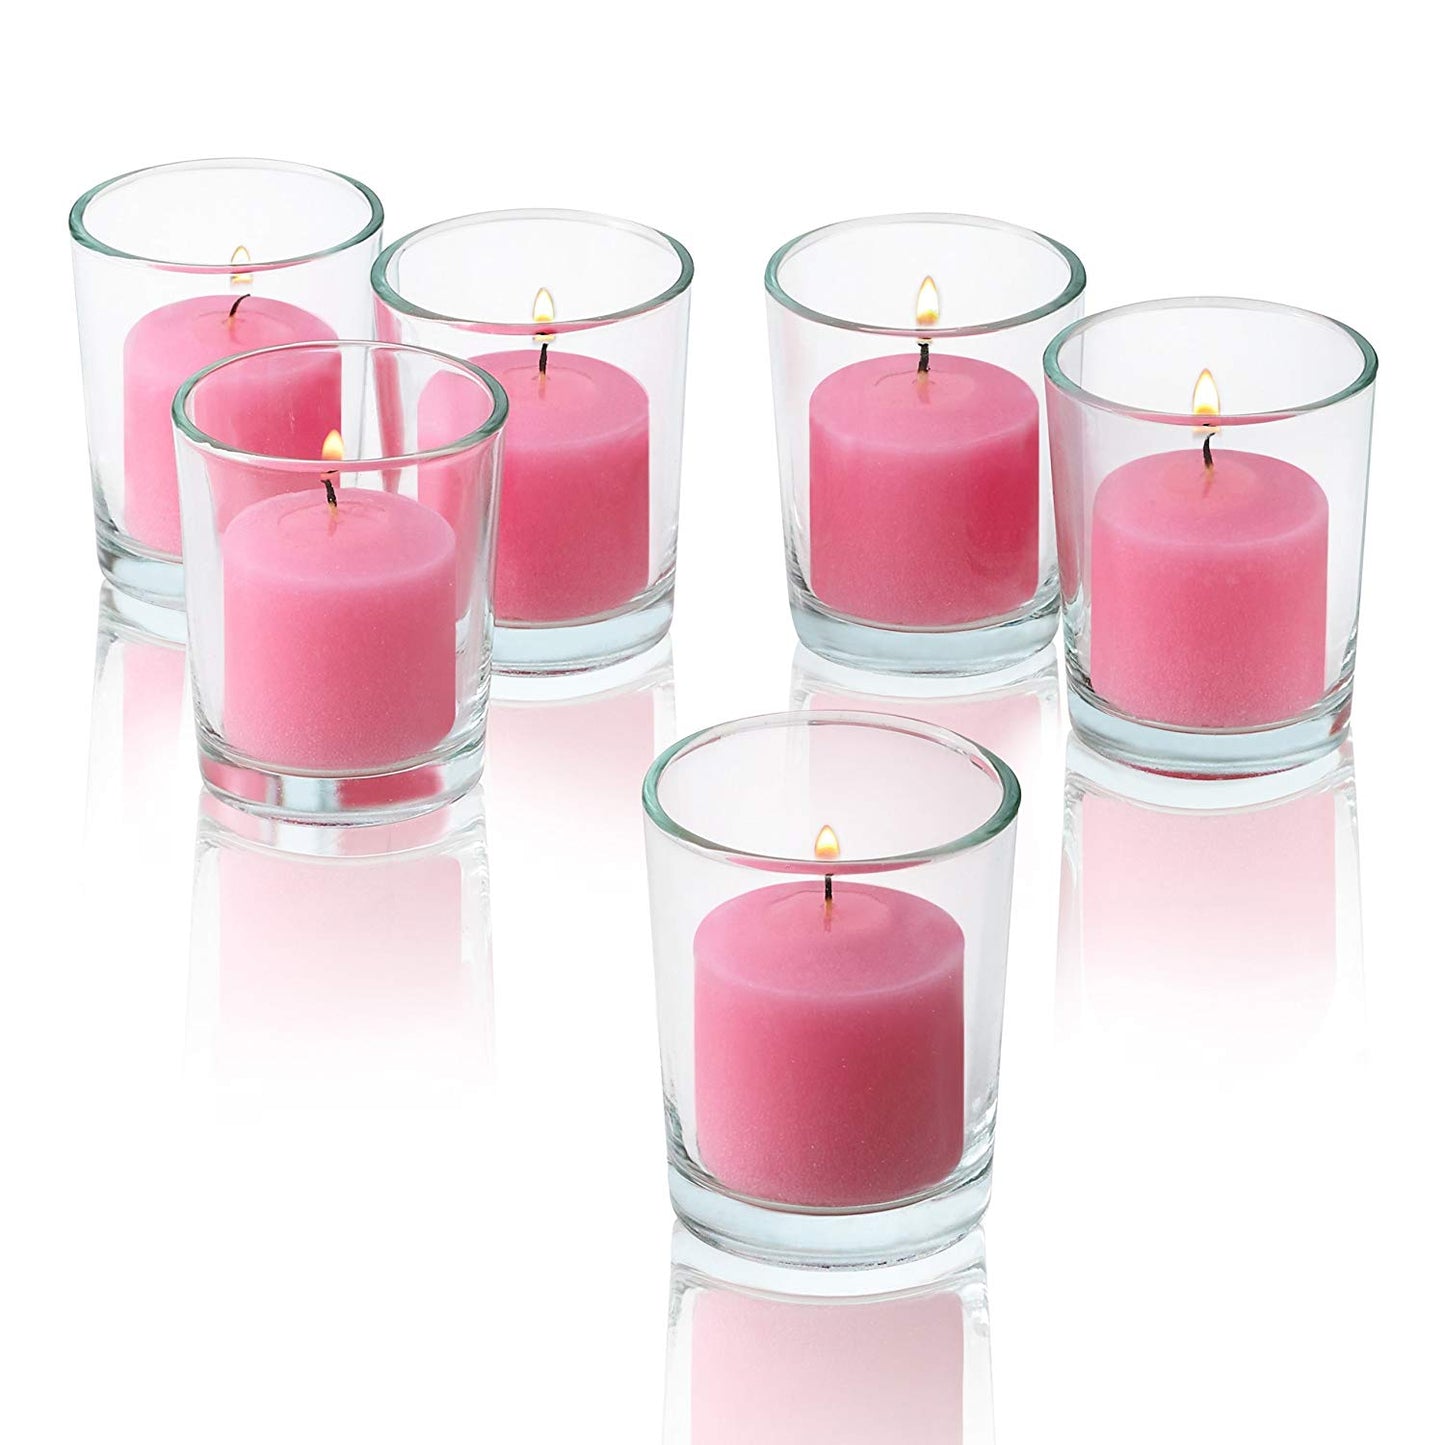 Wax Votive Candles 8 Hours Burning Unscented Ideal for Birthday Aromatherapy Party Candle Gardens & Home Décor (Set of 12, Baby Pink)